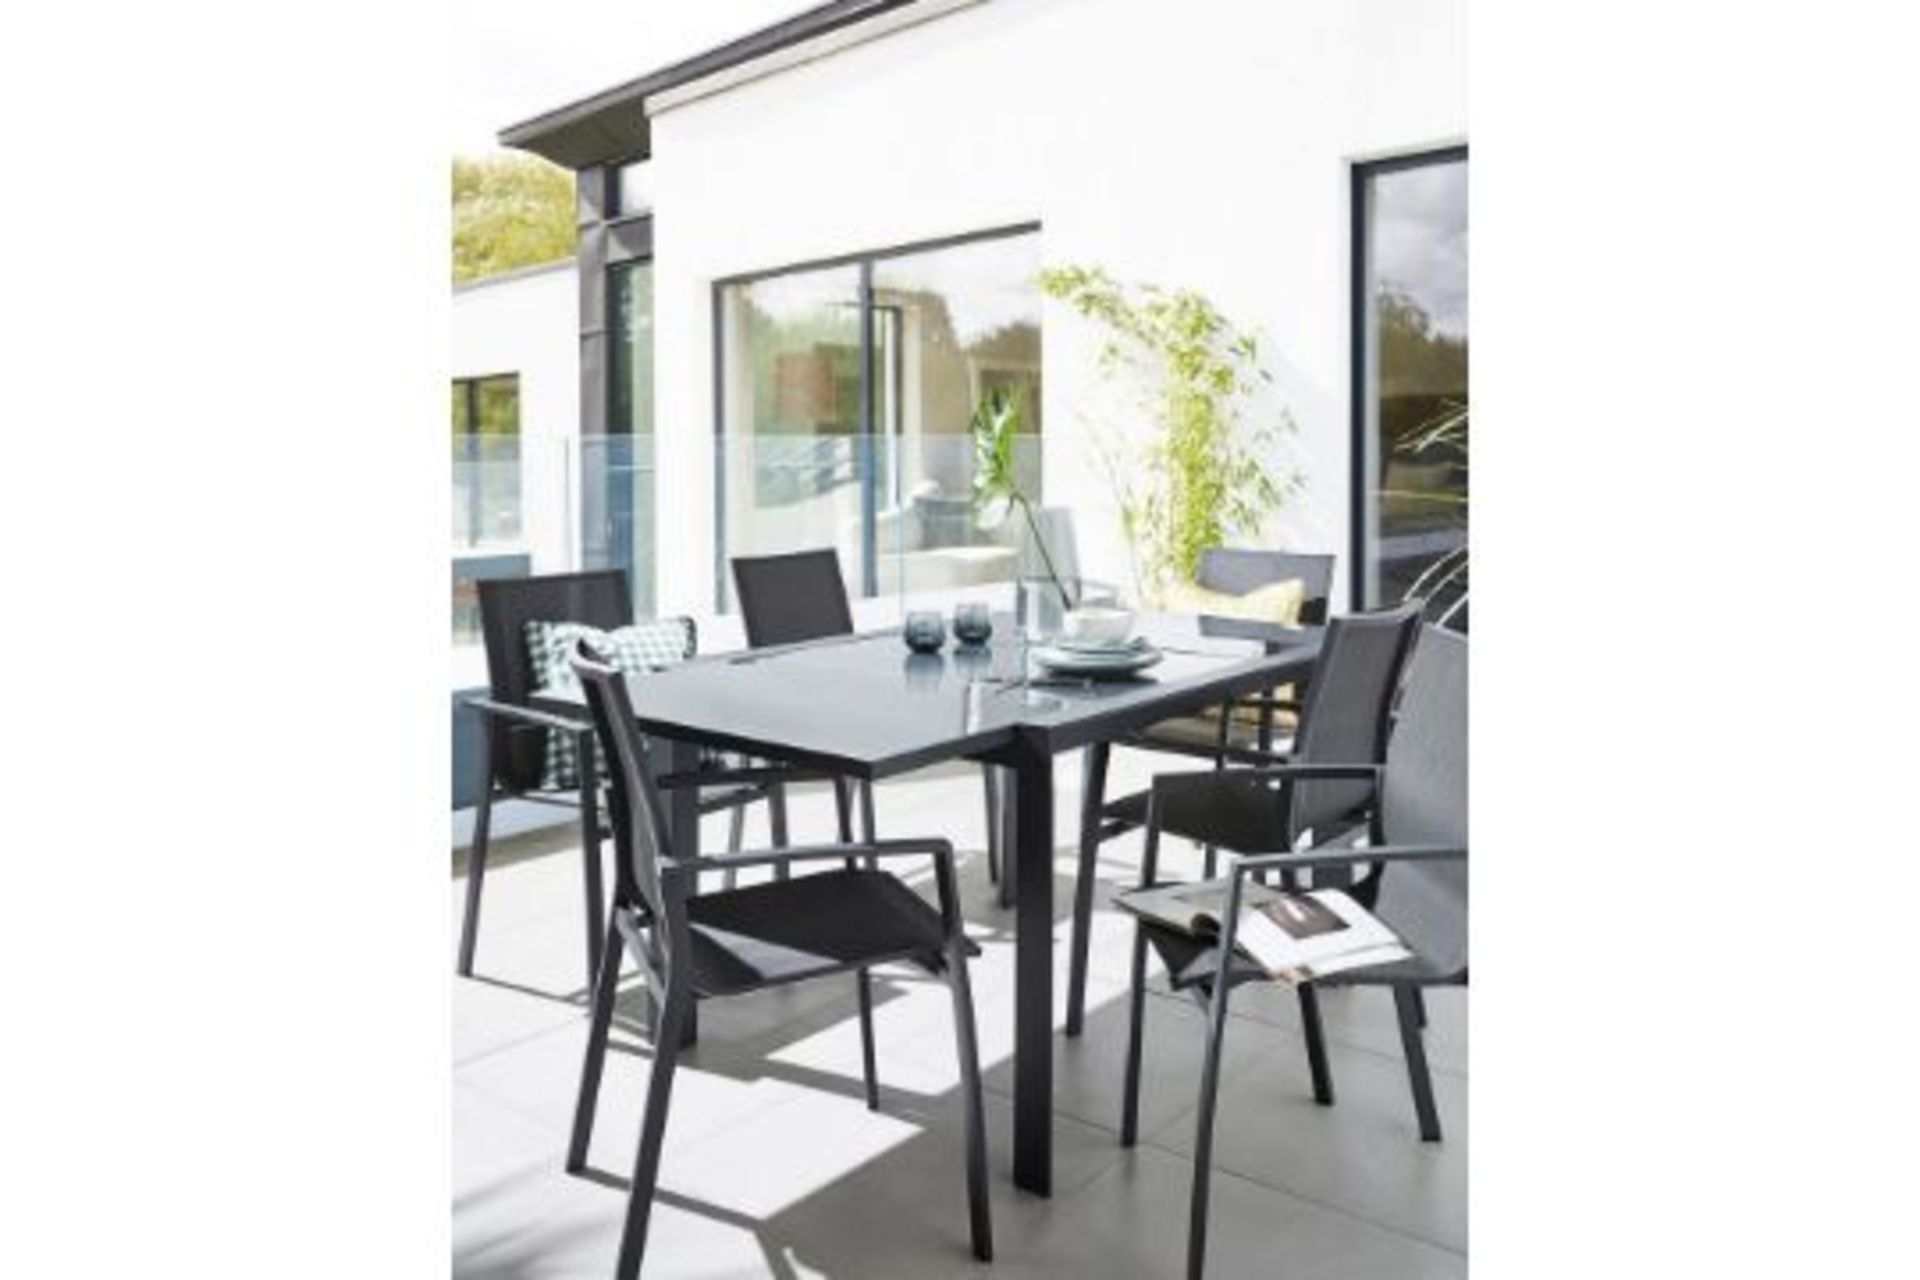 BRAND NEW Oslo 6 Seater Dining Set with Extendable Table. RRP £699 EACH. The Oslo Dining Set with